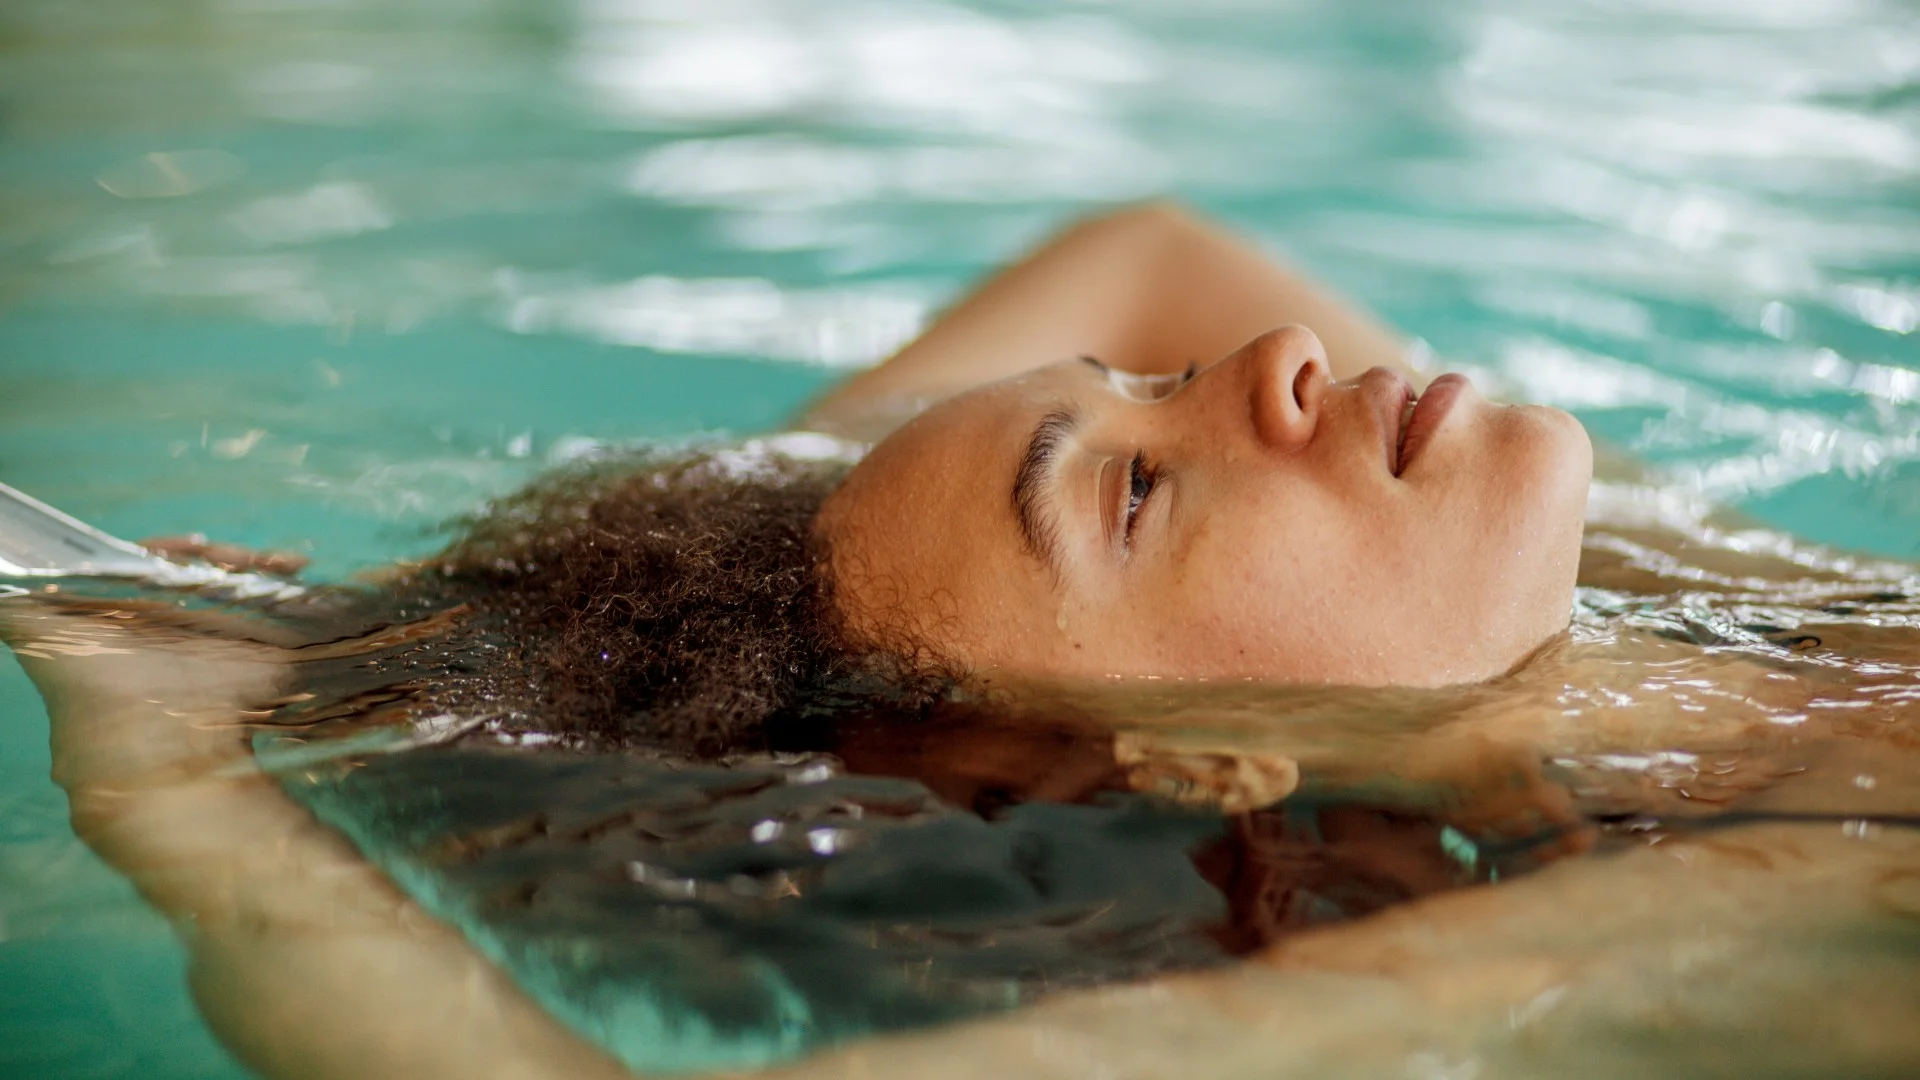 Hair Care When Swimming: 5 Tips To Keep Your Tresses Safe And Dry